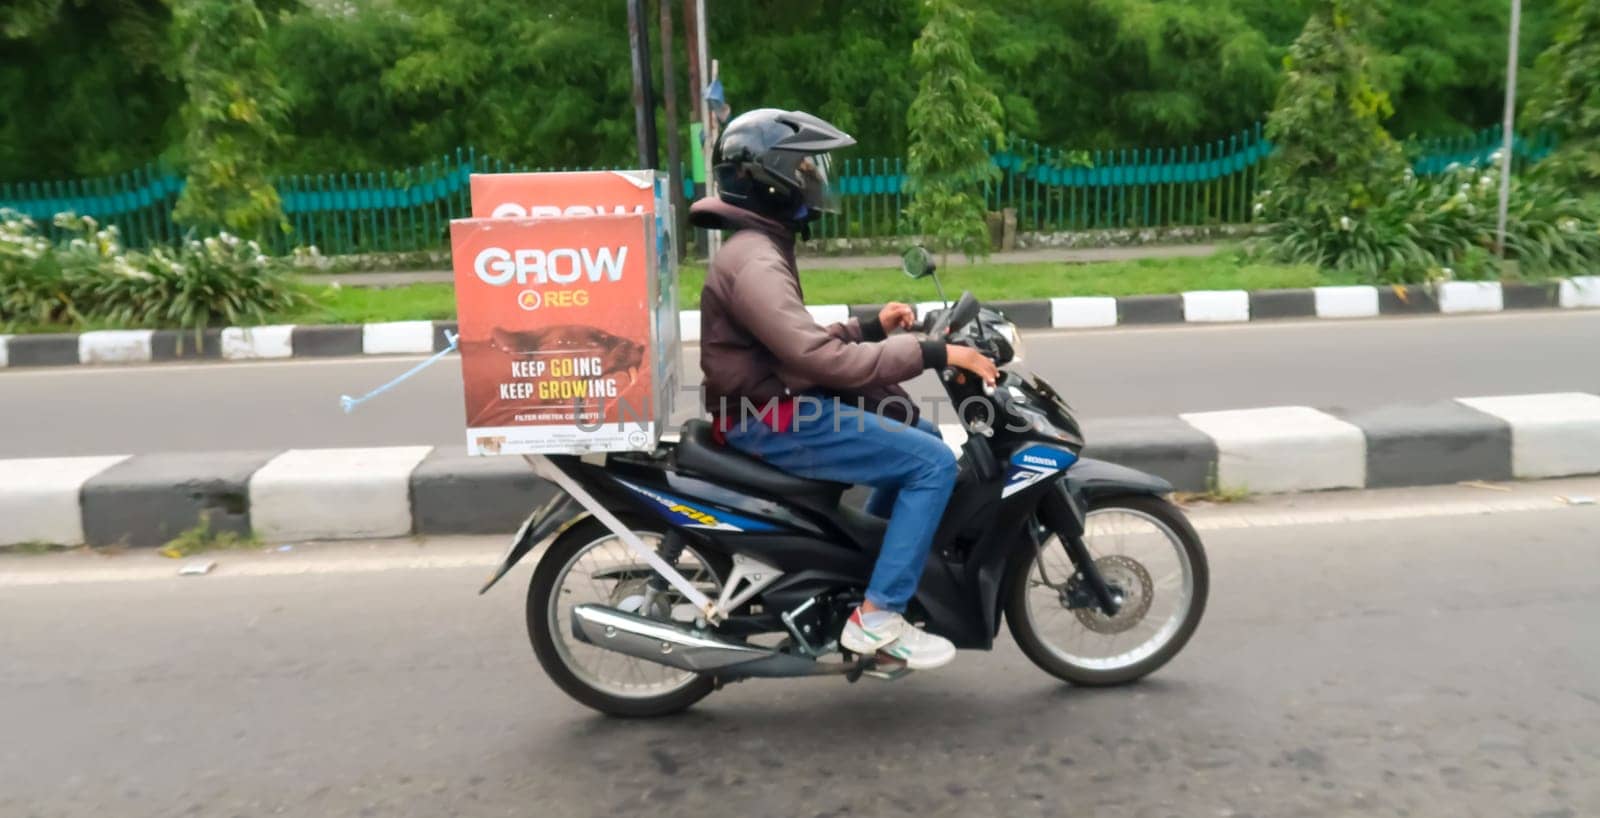 motorbike riding in asia as one of goods transportation method, being used to transport many kind of goods intercity in central java indonesia